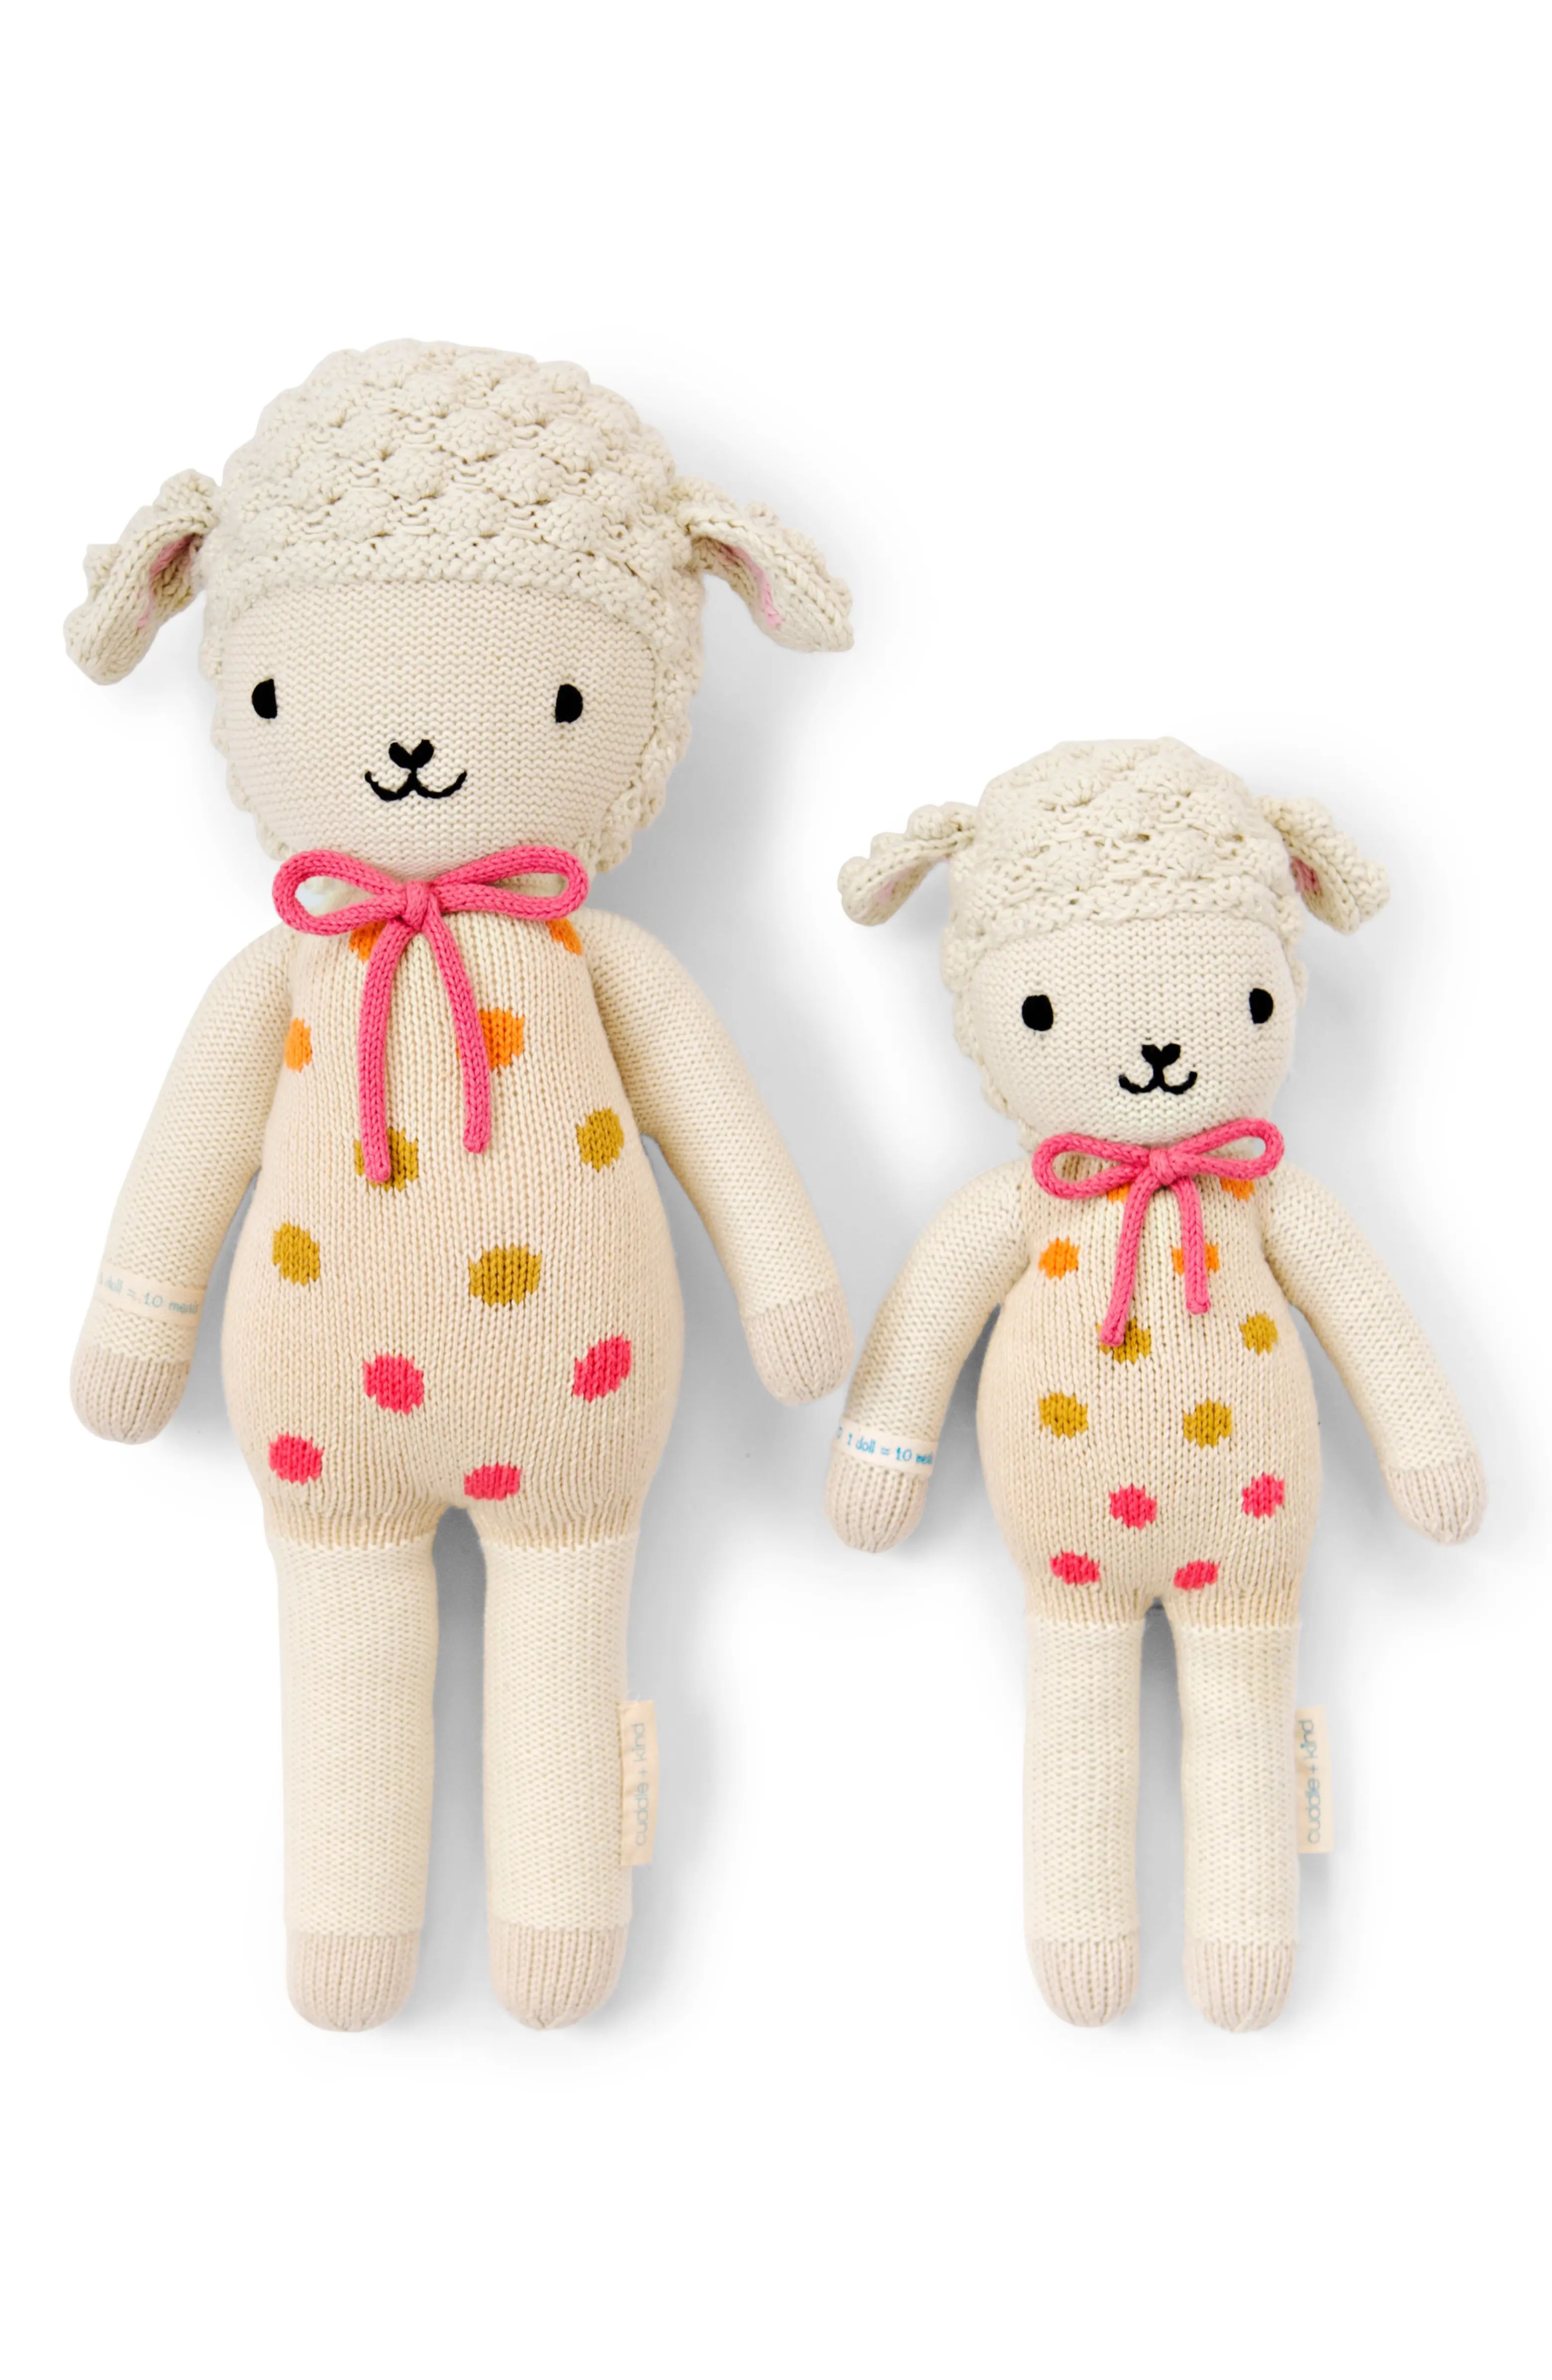 cuddle + kind Lucy the Lamb Stuffed Animal | Nordstrom